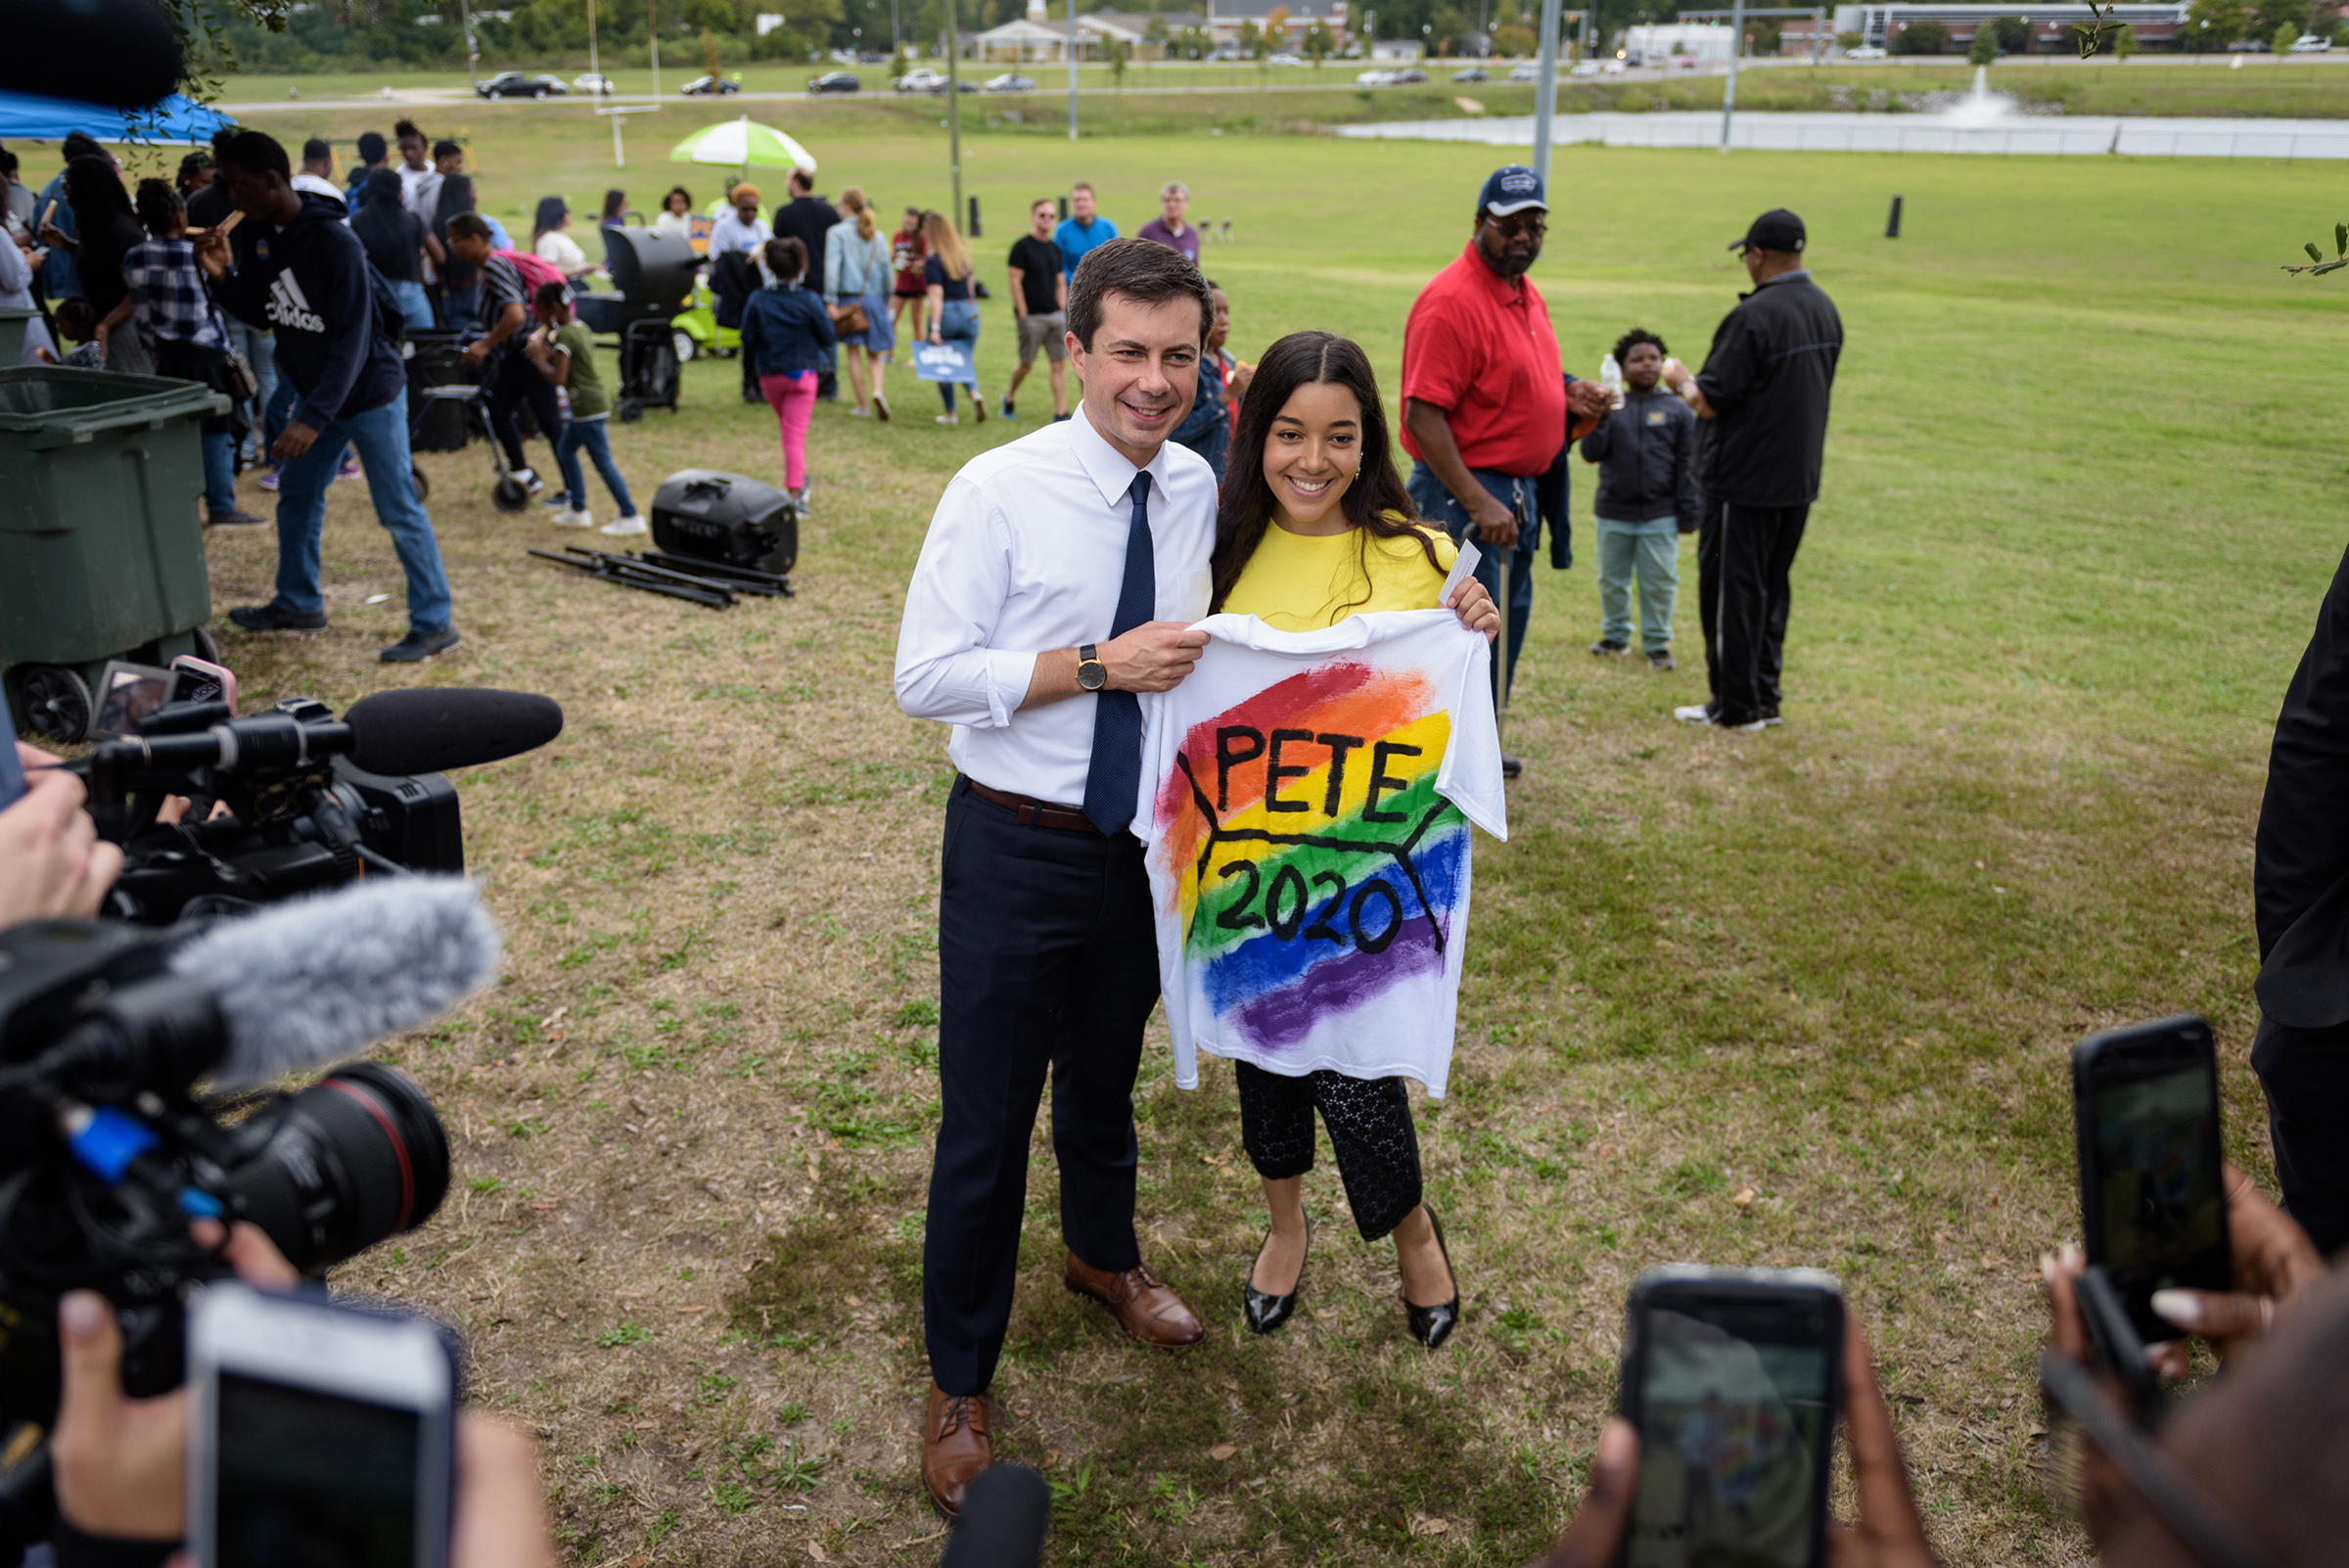 Mayor Pete Buttigieg of South Bend, Ind., a Democratic presidential hopeful, poses for a photo with Kashmir Imani, holding a T-shirt she designed, during a homecoming tailgate event at Allen University, a historically black campus in Columbia, S.C., on Oc